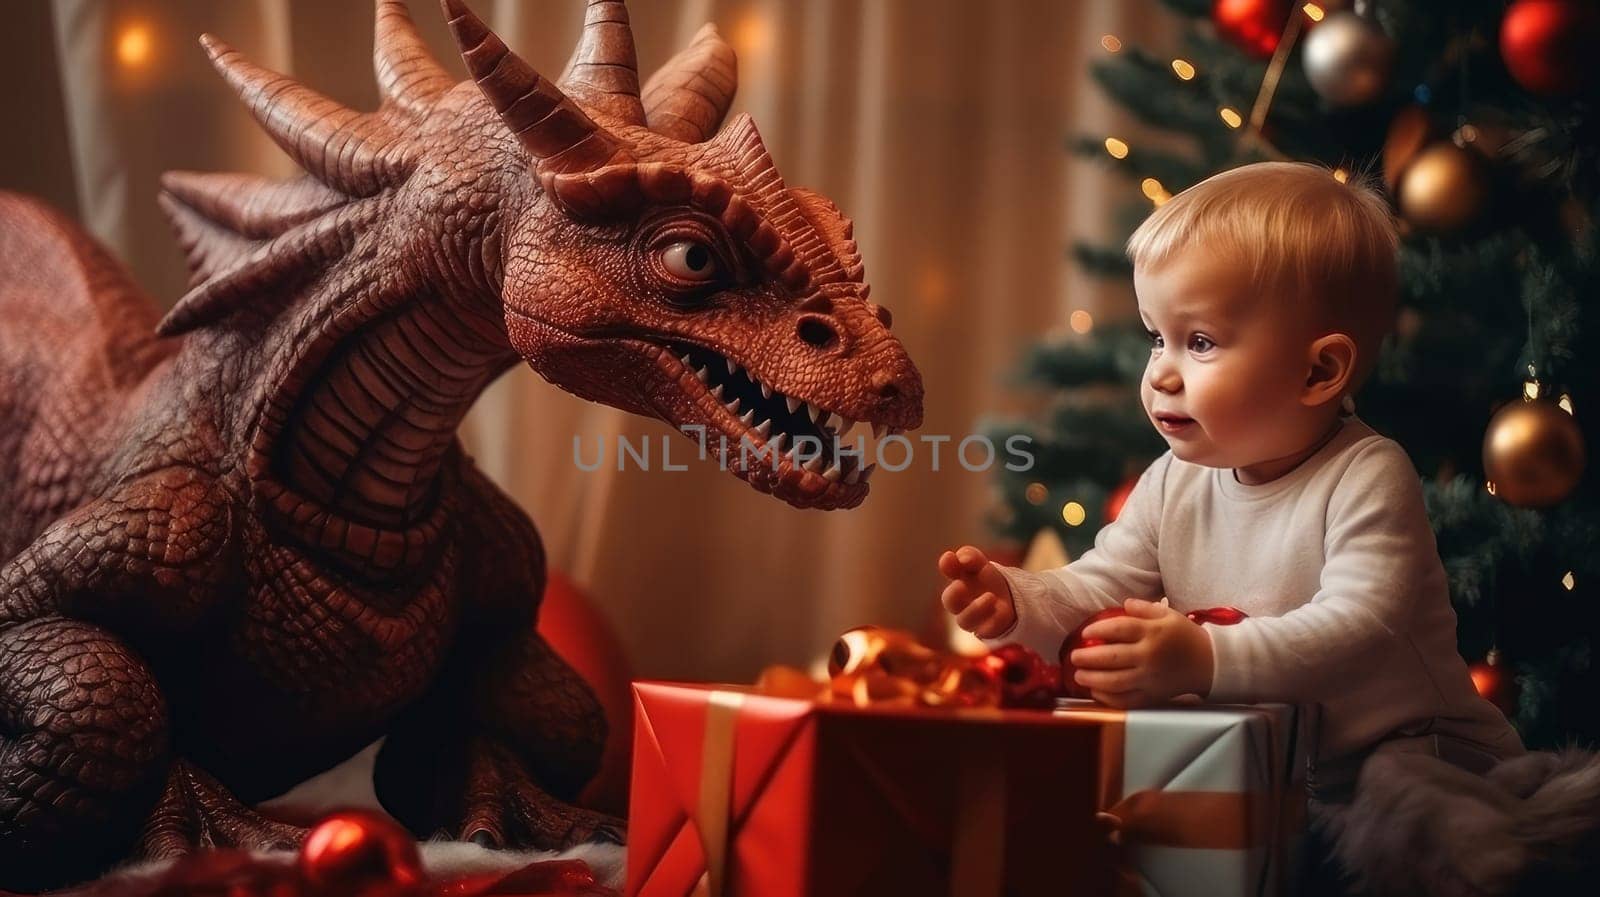 The dragon is a symbol of the new year according to the eastern calendar and a small child is together near the New Year tree with Christmas gifts and lights. AI generated